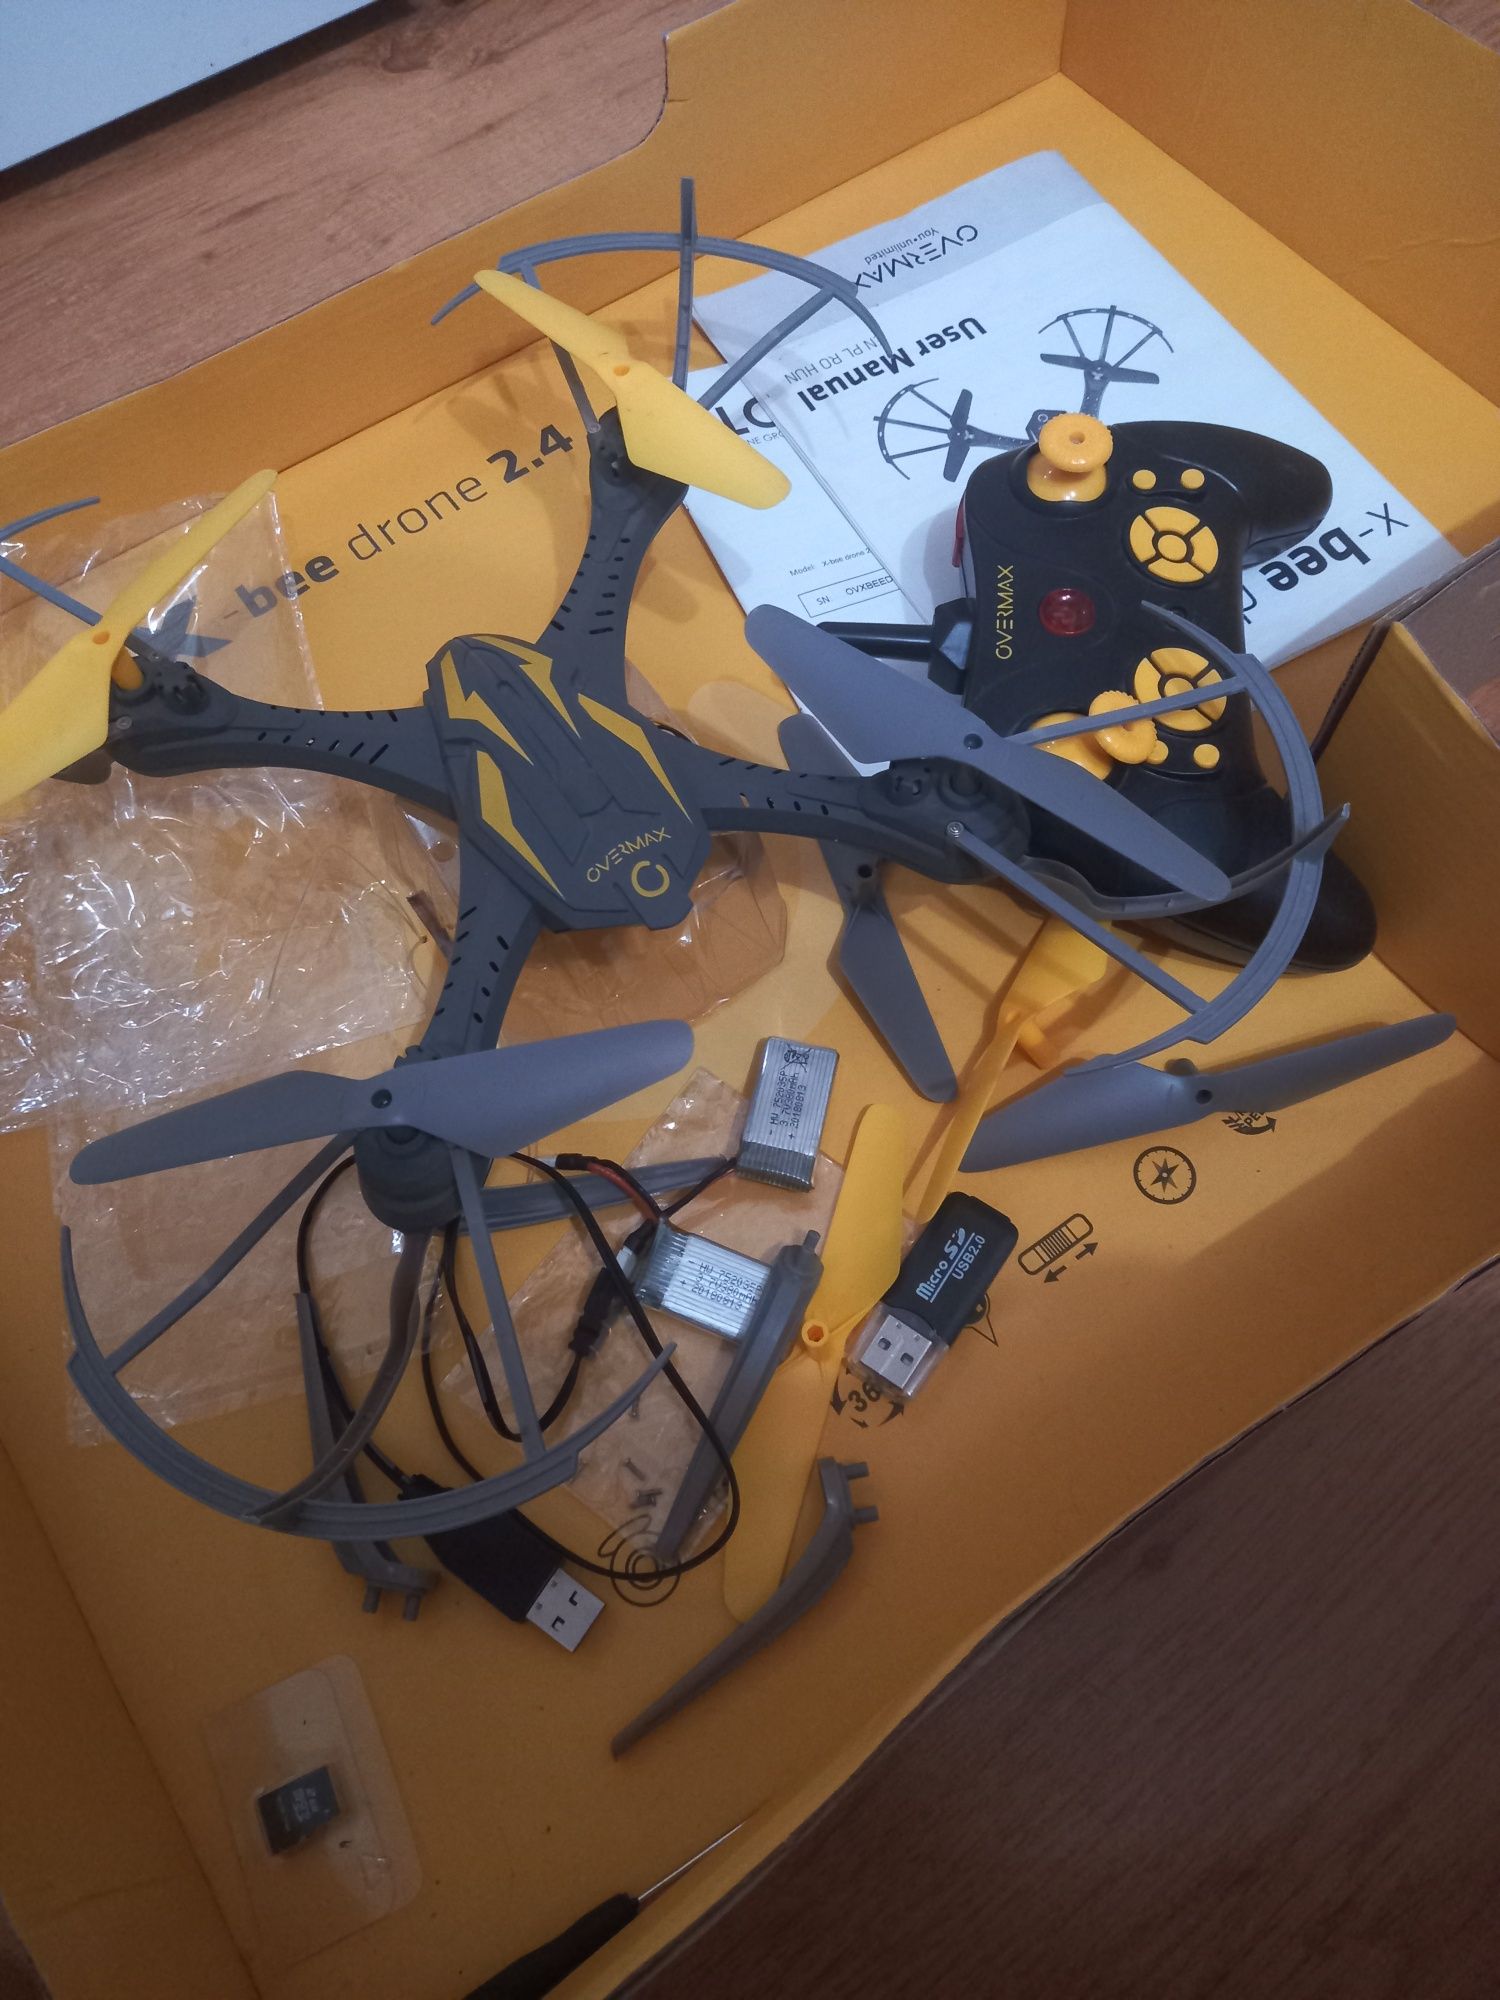 Dron overmax x-bee drone 2.4